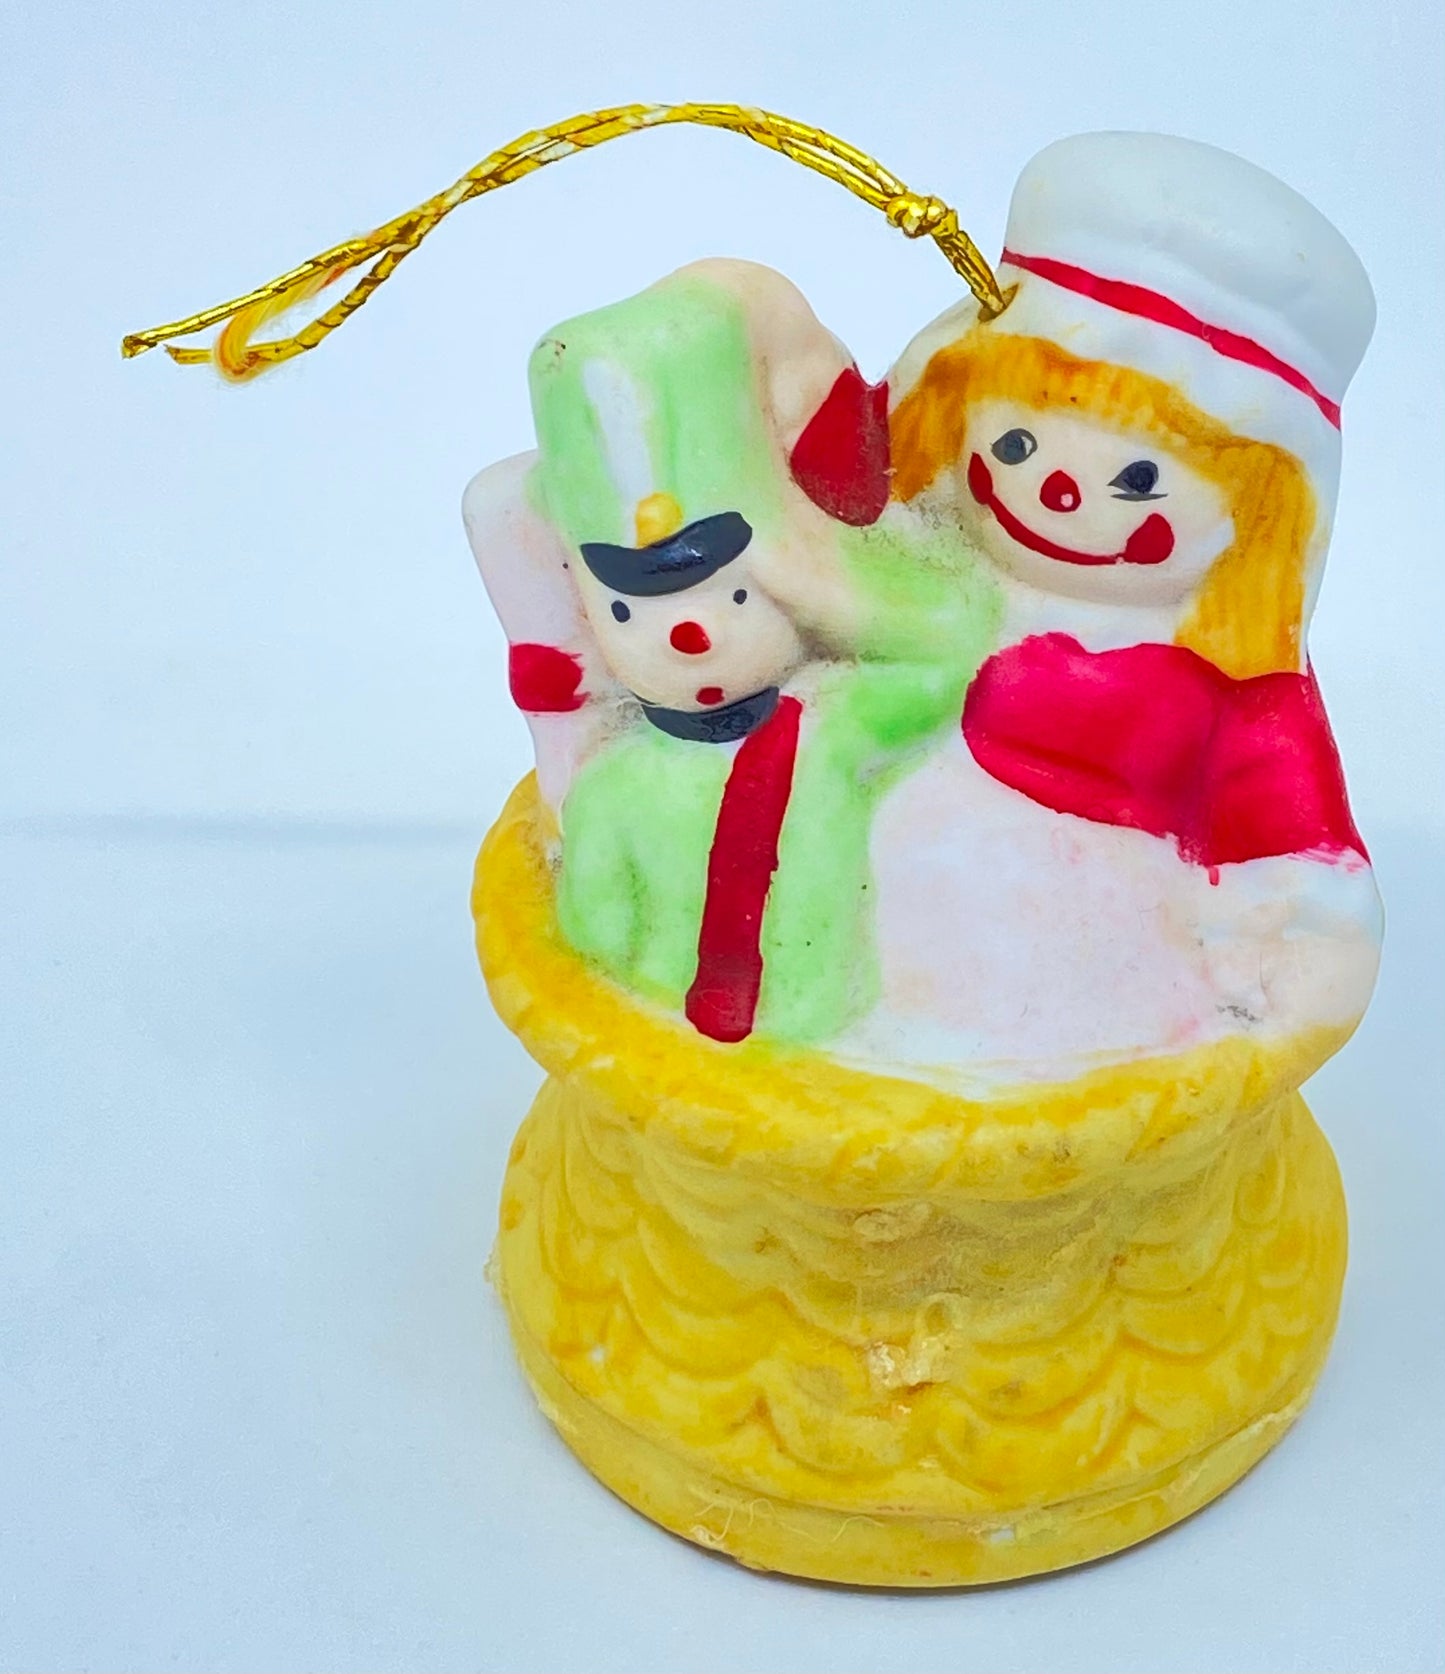 1970s/80s Christmas ornament ceramic/bisque bell - Toys in basket - Jasco Taiwan